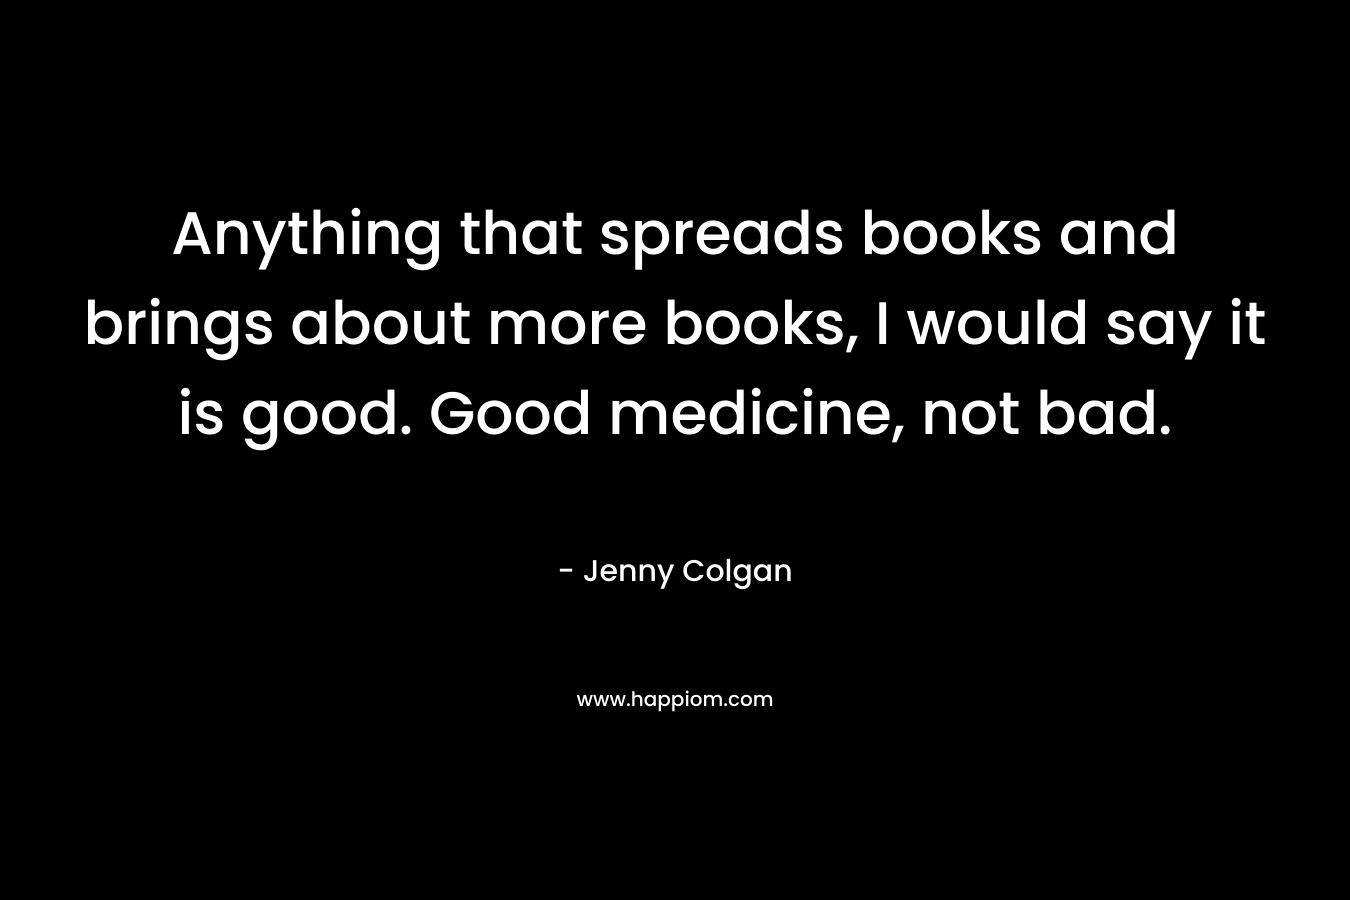 Anything that spreads books and brings about more books, I would say it is good. Good medicine, not bad.